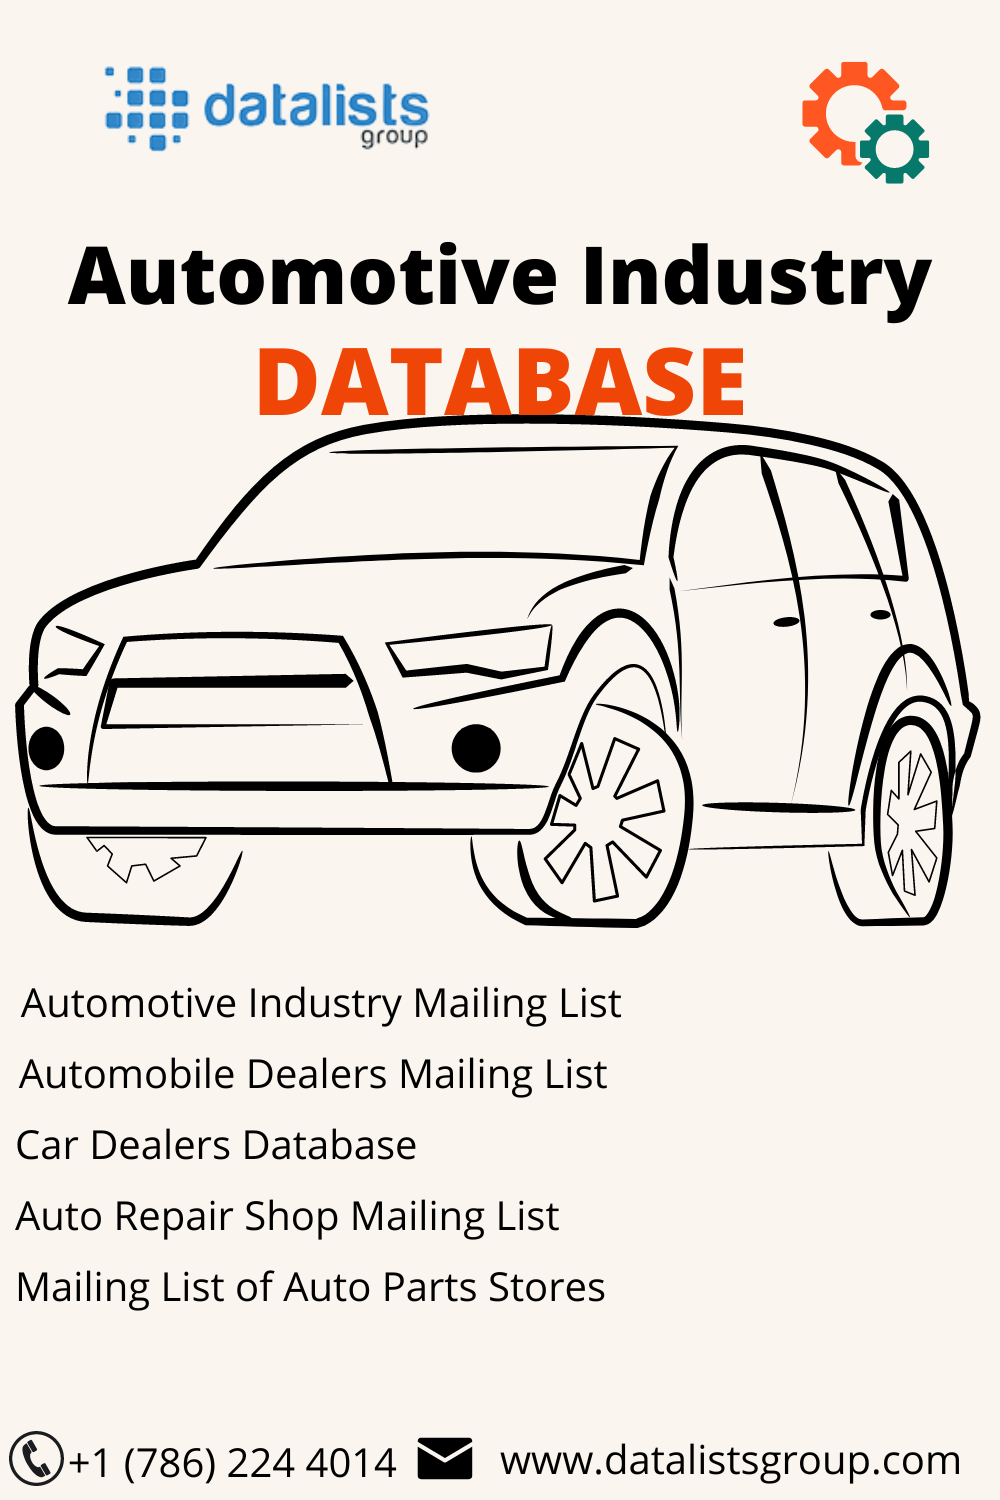 Worldwide Automotive Industry – Facts and Data – DatalistsGroup